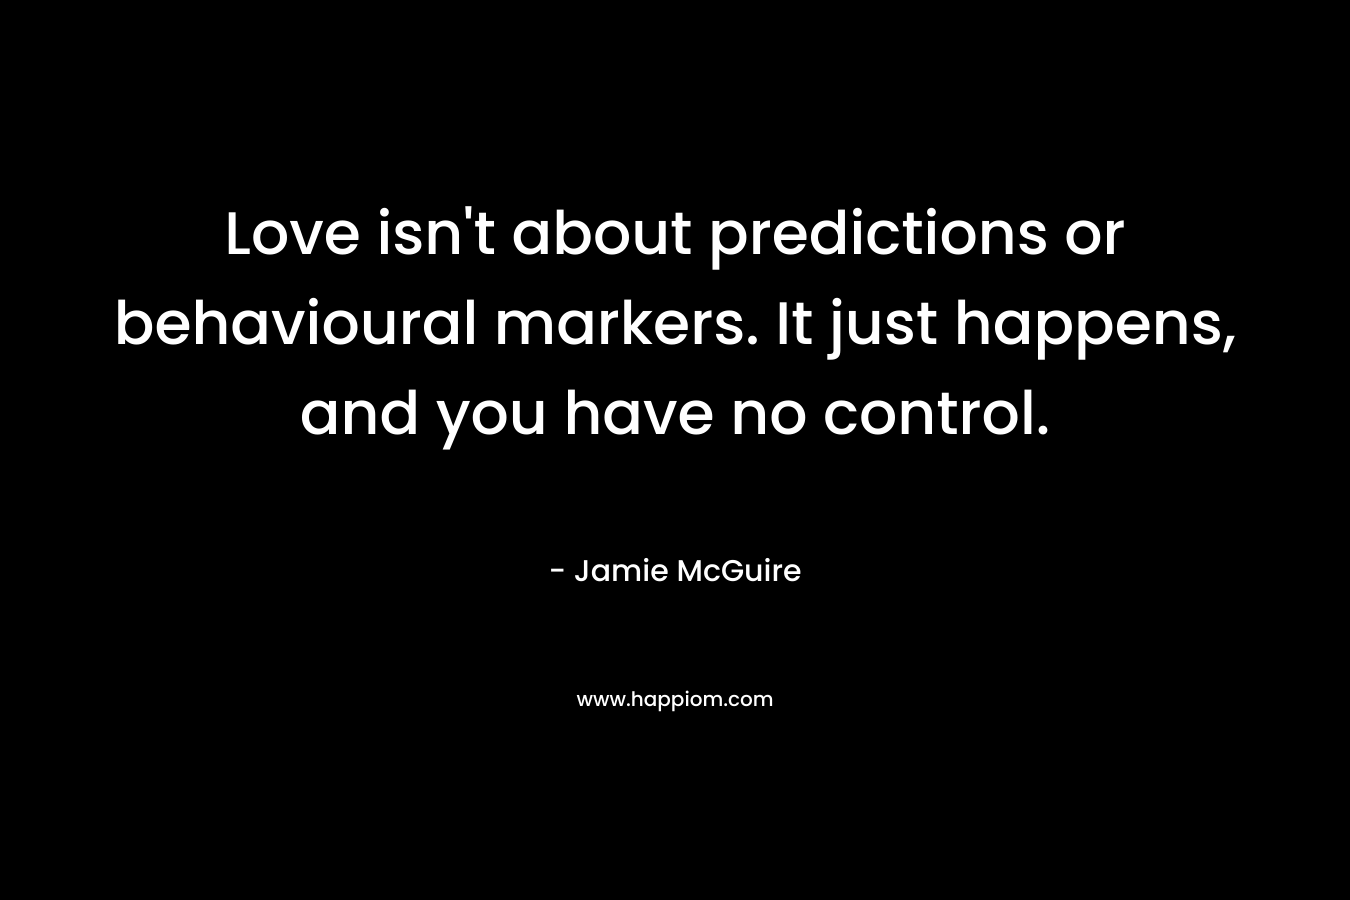 Love isn’t about predictions or behavioural markers. It just happens, and you have no control. – Jamie McGuire